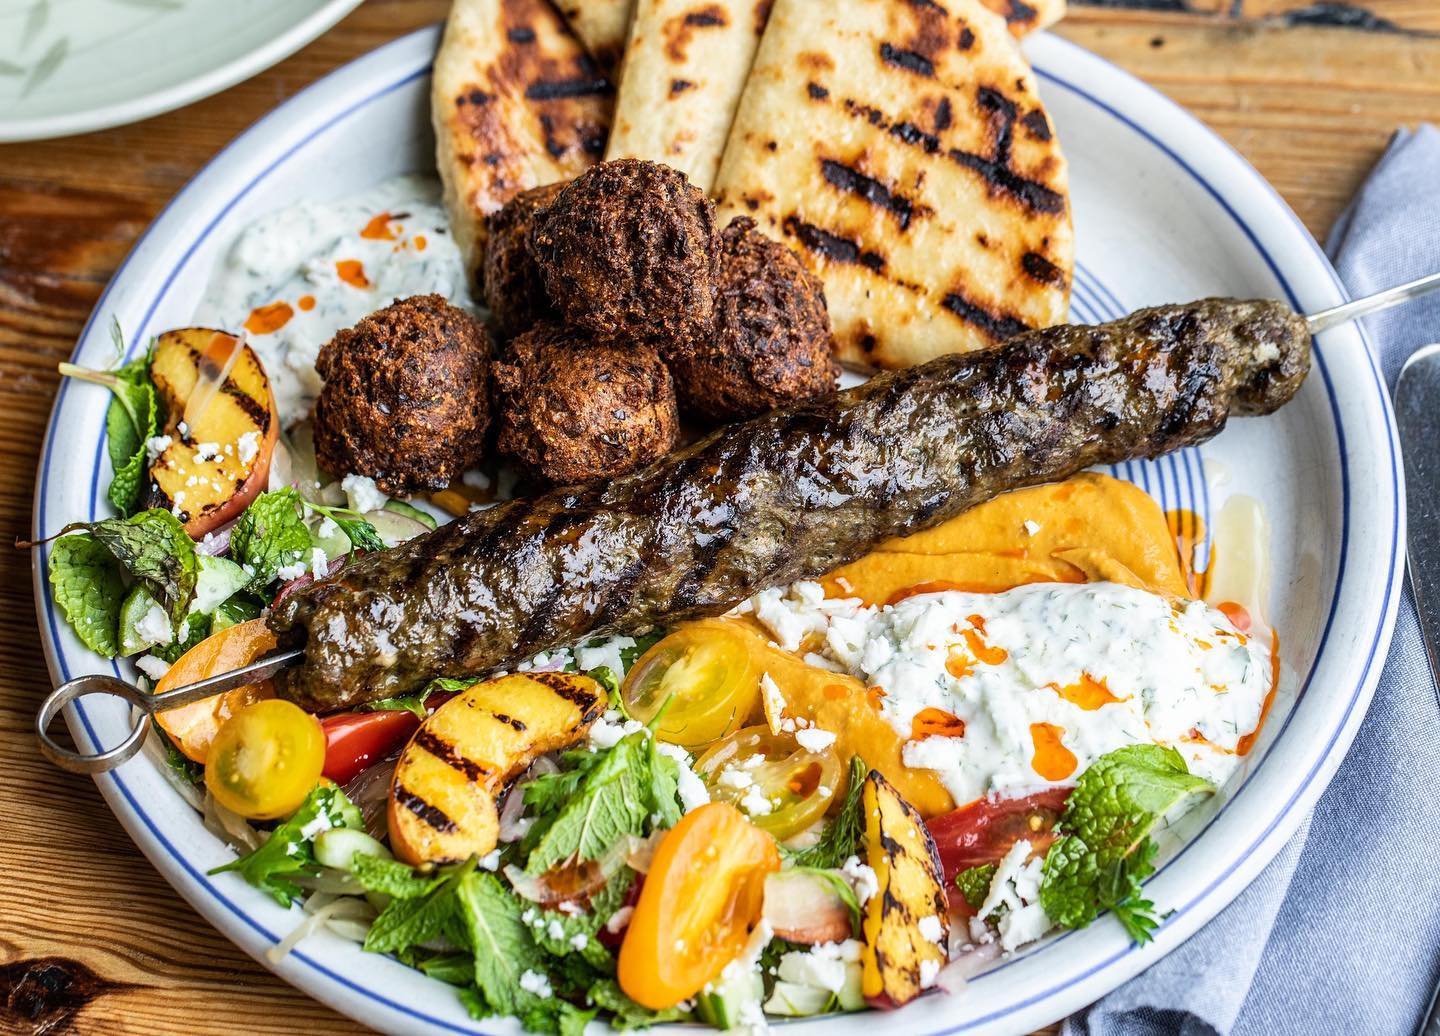 The grilled goat kofta plate from Odd Duck